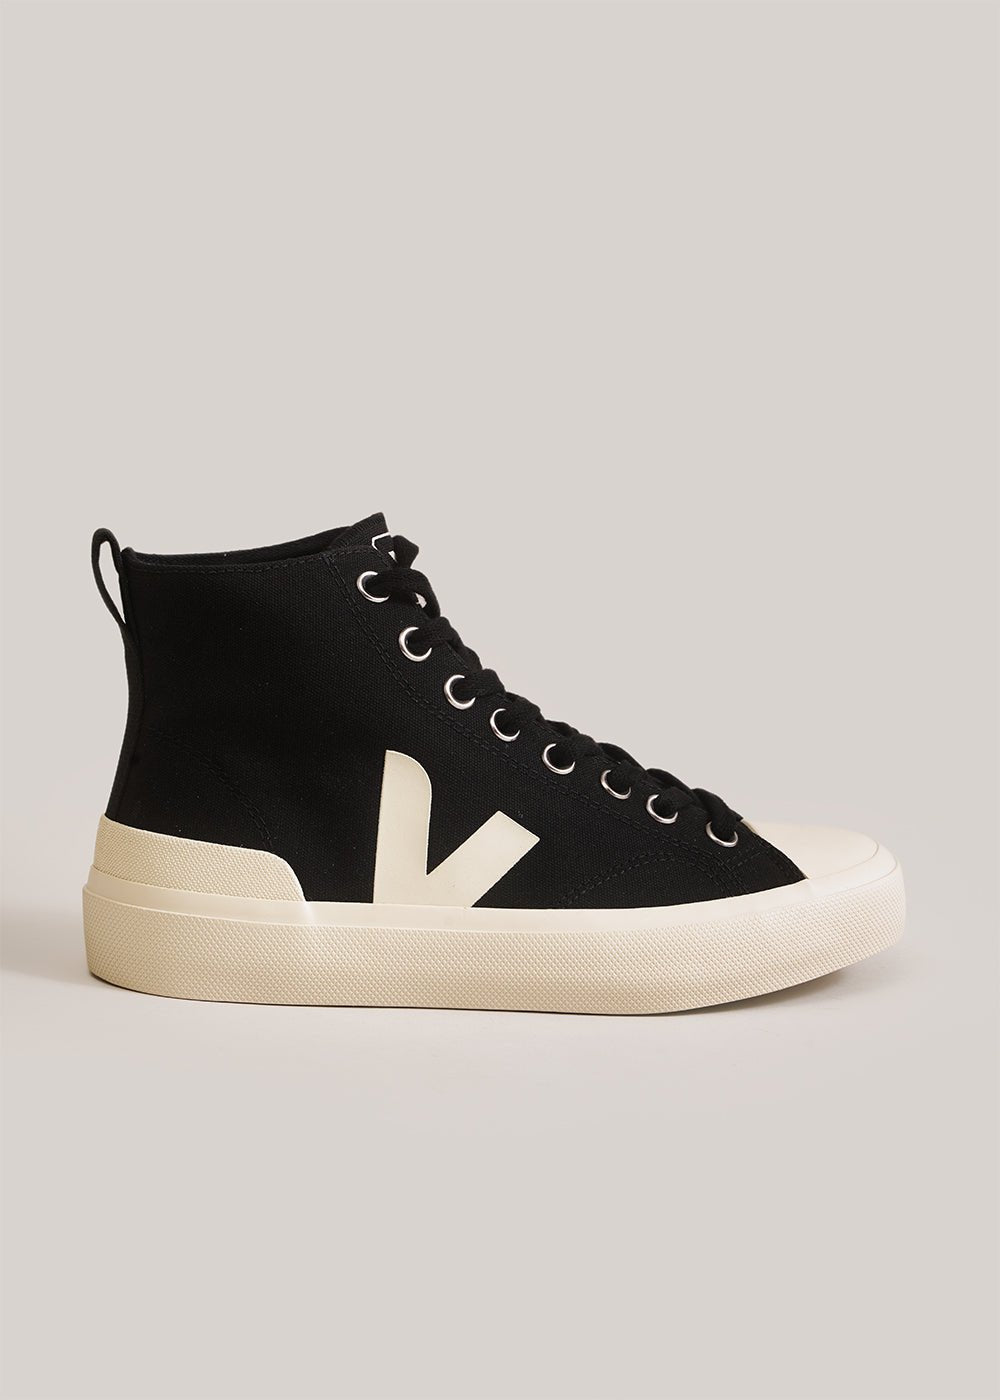 Veja Black Pierre Wata II Sneakers - New Classics Studios Sustainable Ethical Fashion Canada